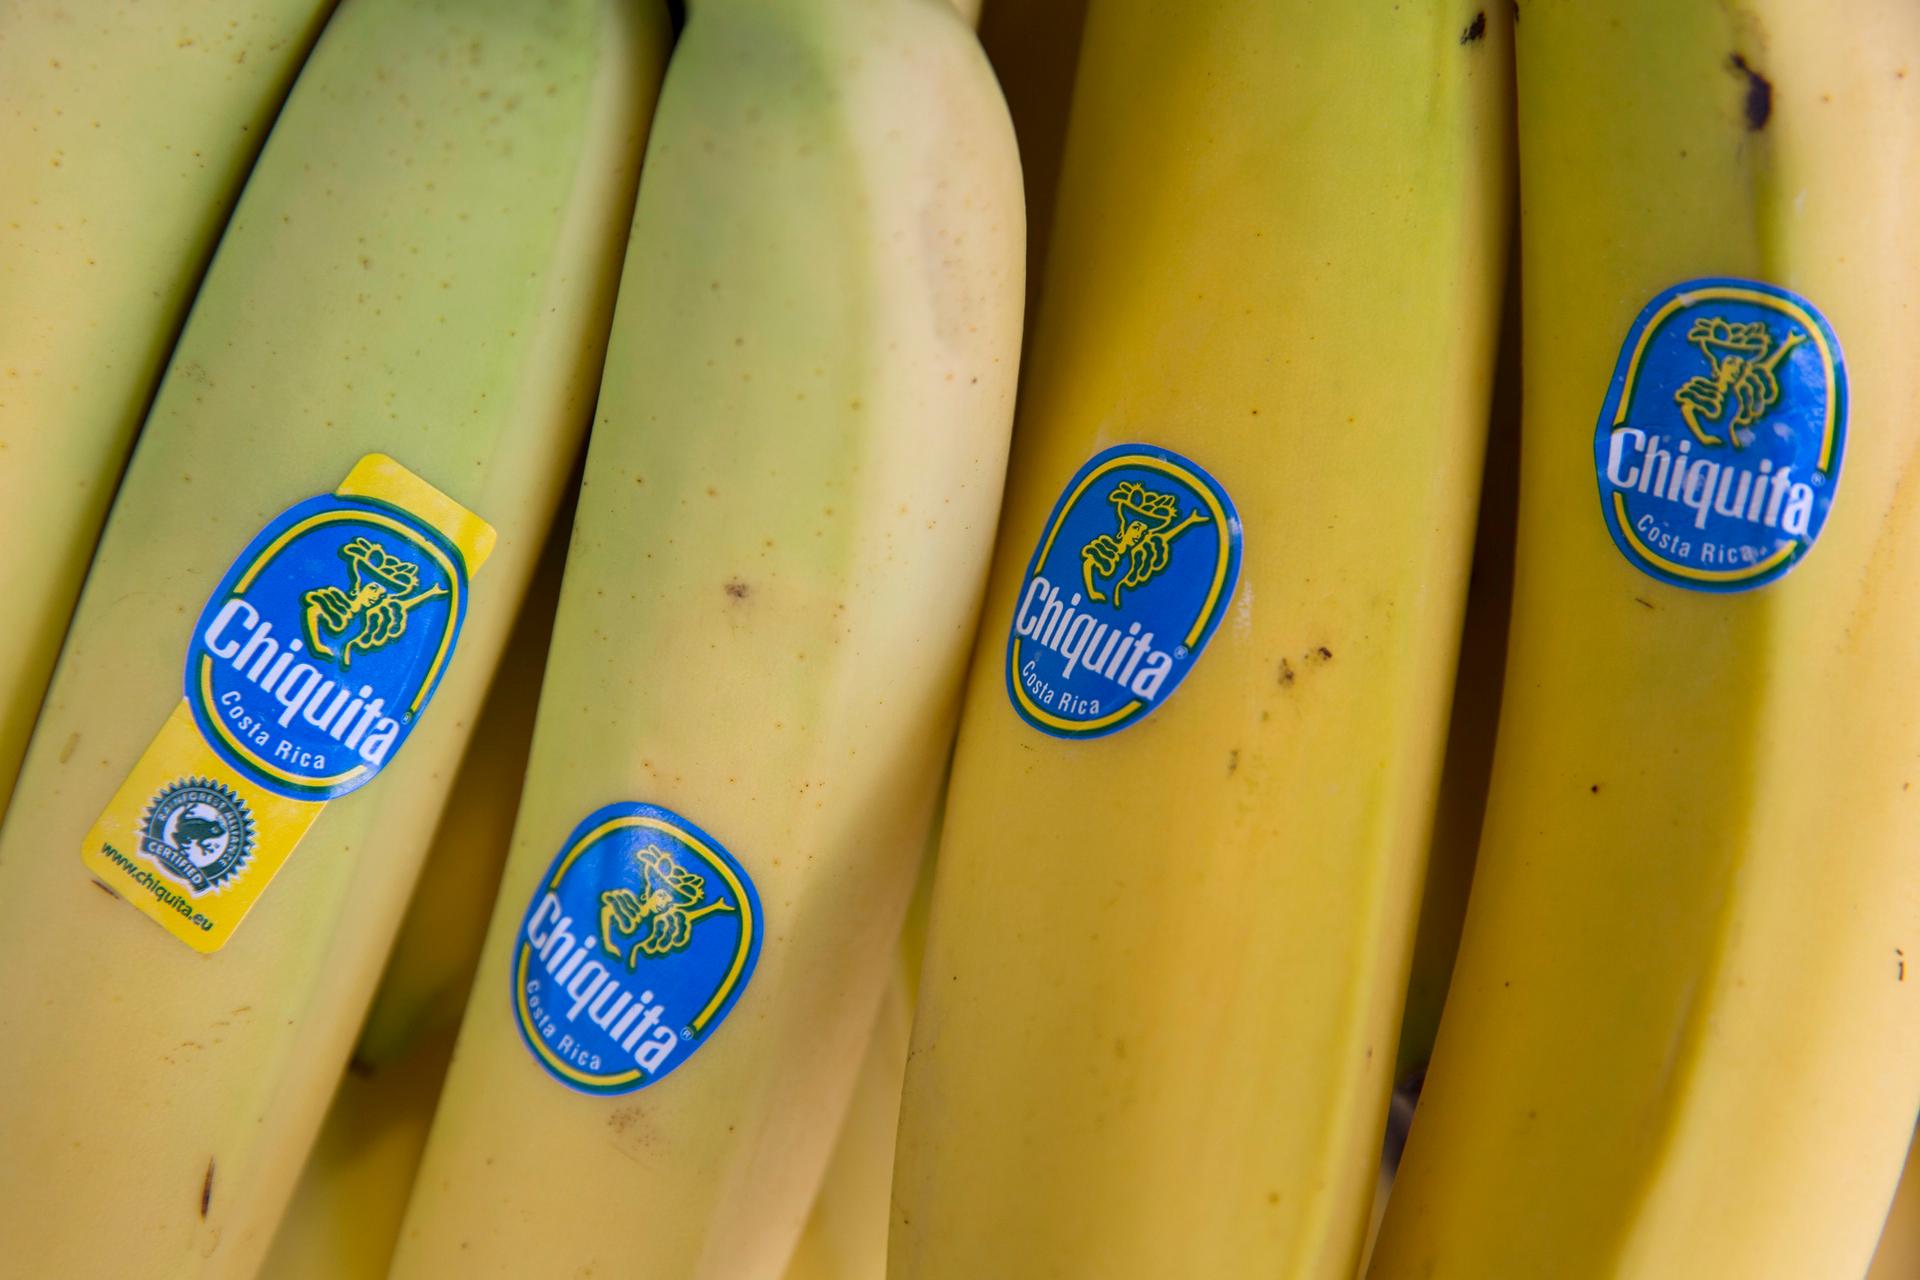 Chiquita bananas are displayed for sale in a London store. Shares in Irish banana company Fyffes slumped on Monday after Cutrale Group and Brazilian investment firm Safra Group offered to buy Chiquita Brands, threatening Fyffes' earlier deal with Chiquita